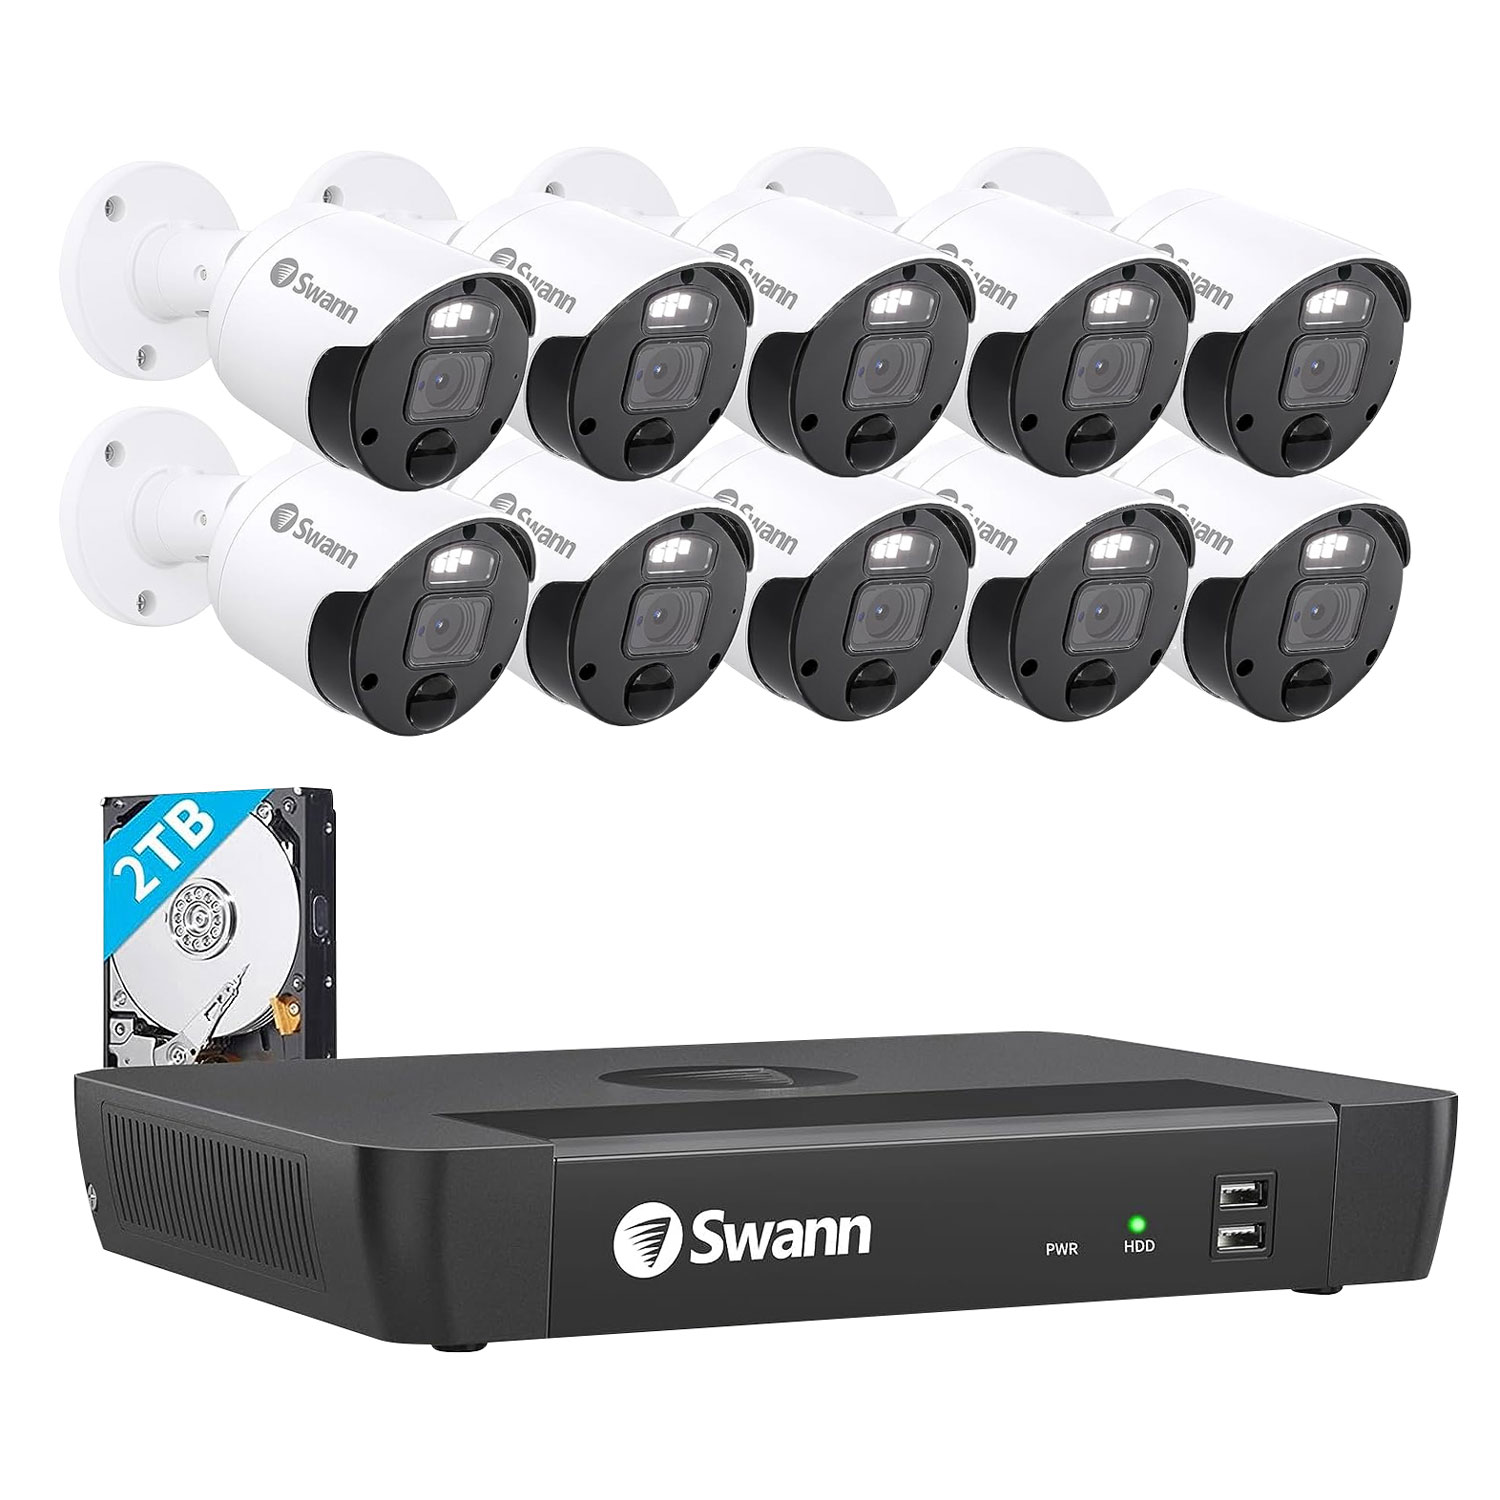 Swann Master Series Indoor/Outdoor PoE Wired 16-CH 2TB NVR Security System with 10 Bullet 4K Ultra HD Cameras - Black